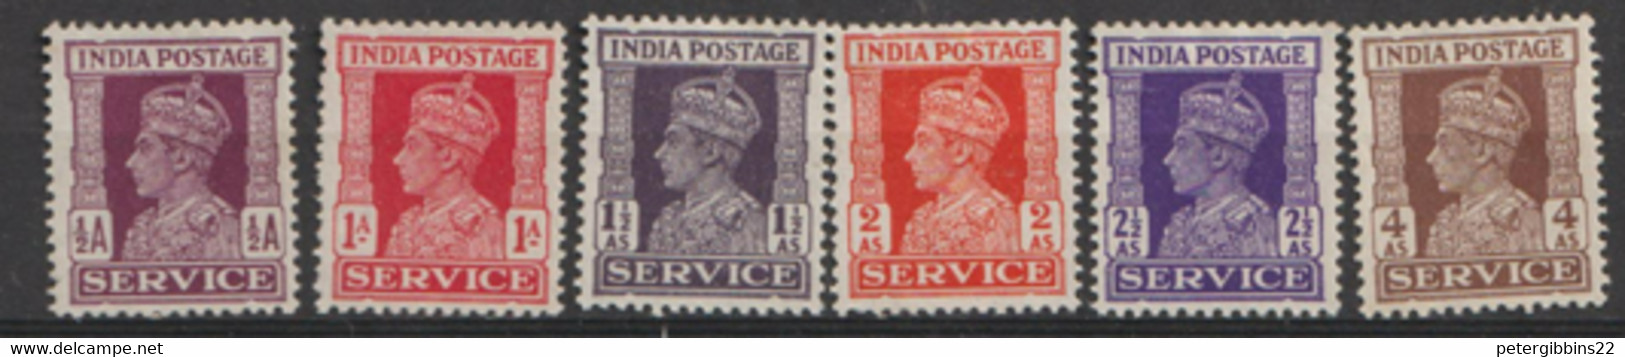 India  1959  Serviice  Various Values   Mounted Mint - Unused Stamps